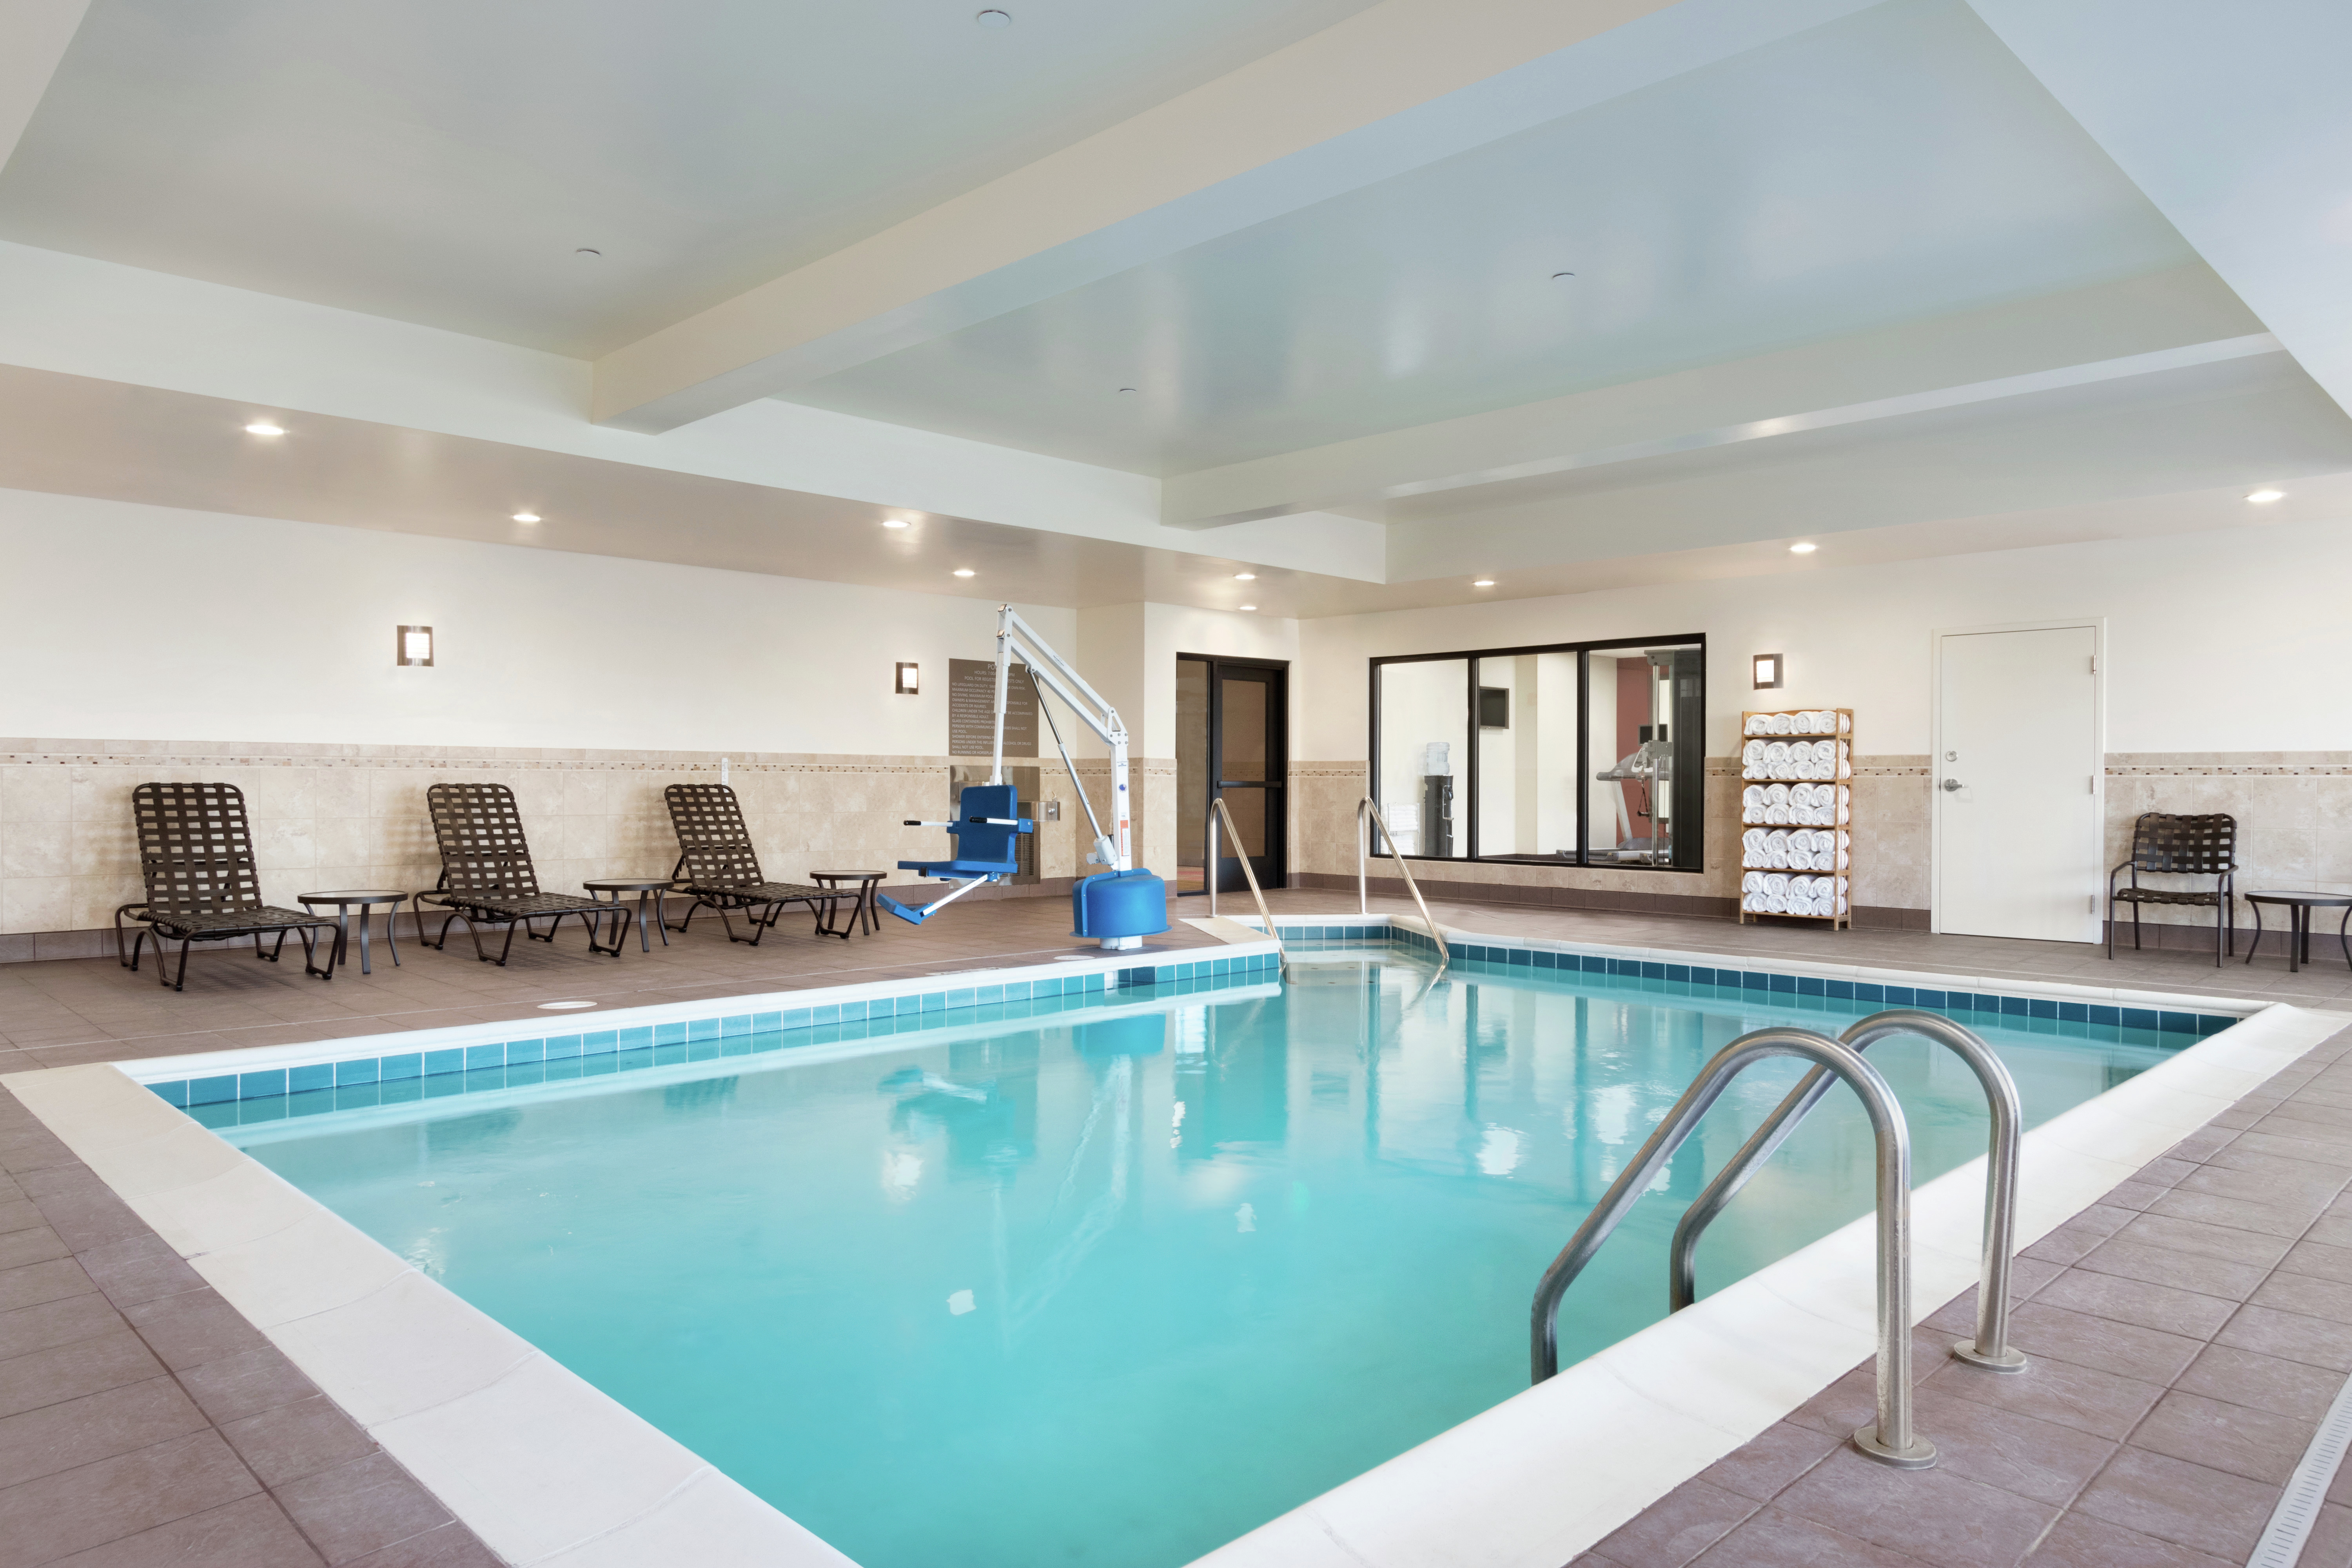 Indoor Pool and Lounge Chairs